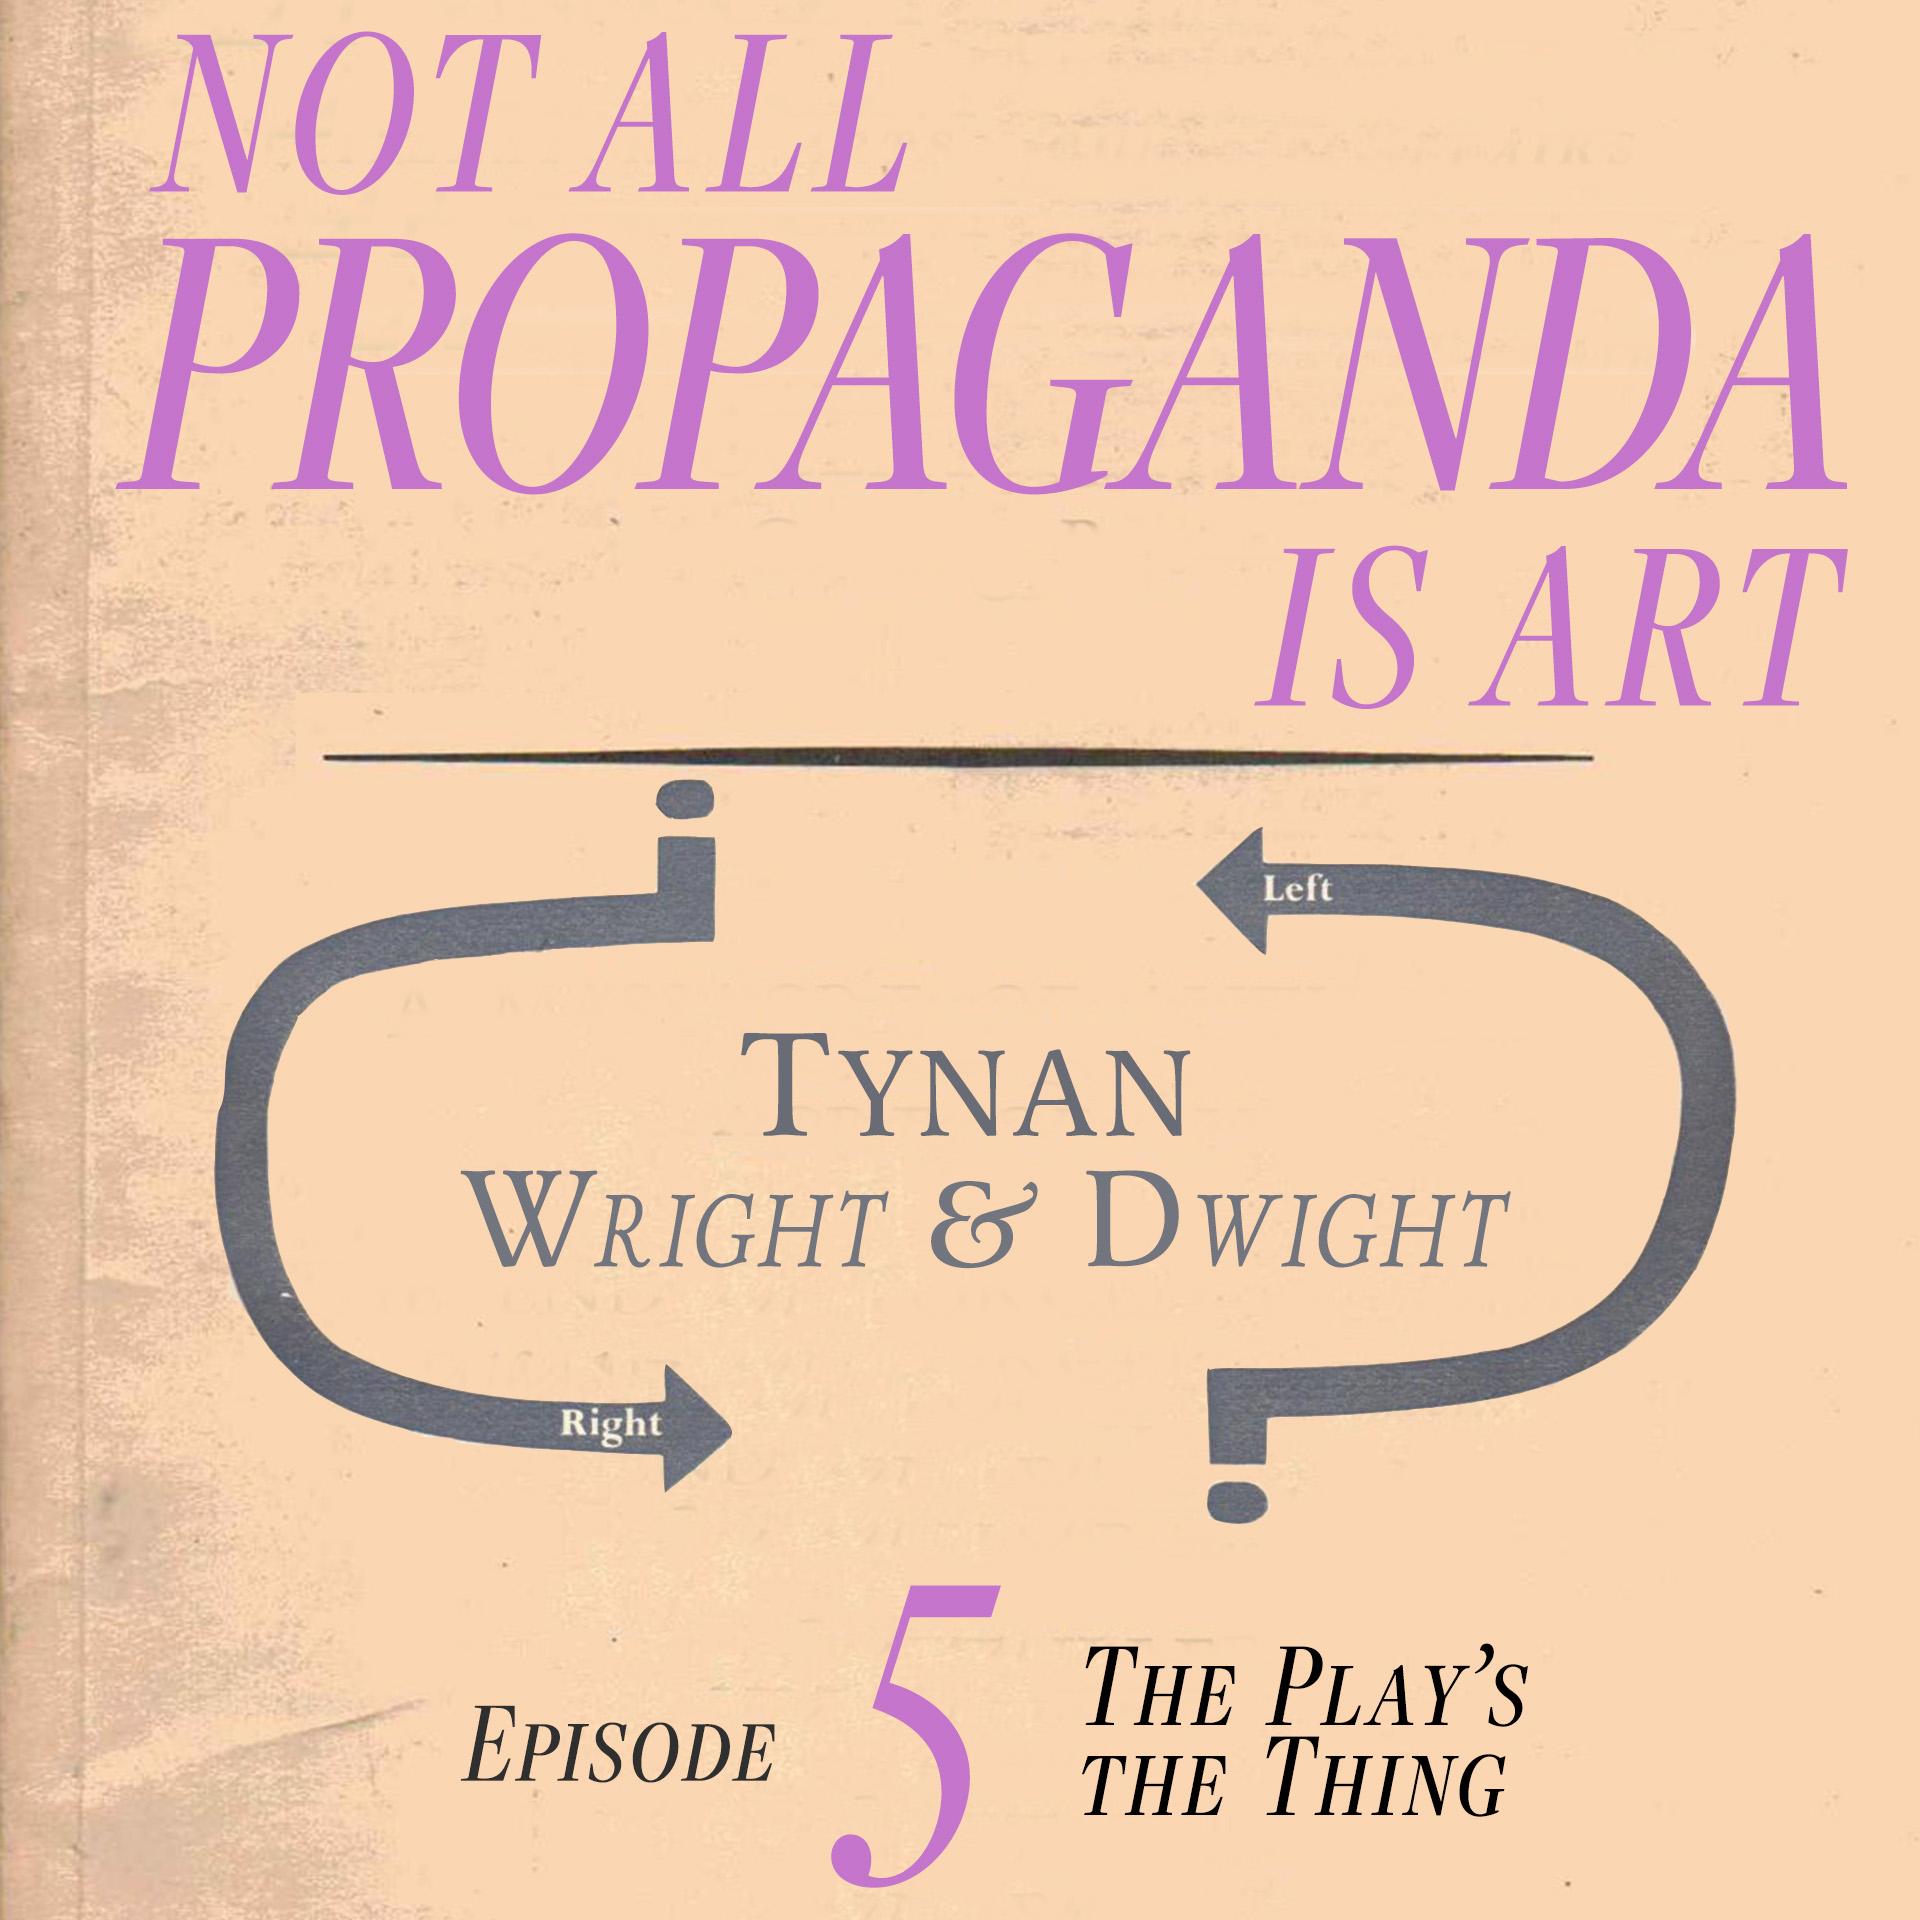 Thumbnail for "Not All Propaganda is Art 5: The Play's the Thing".